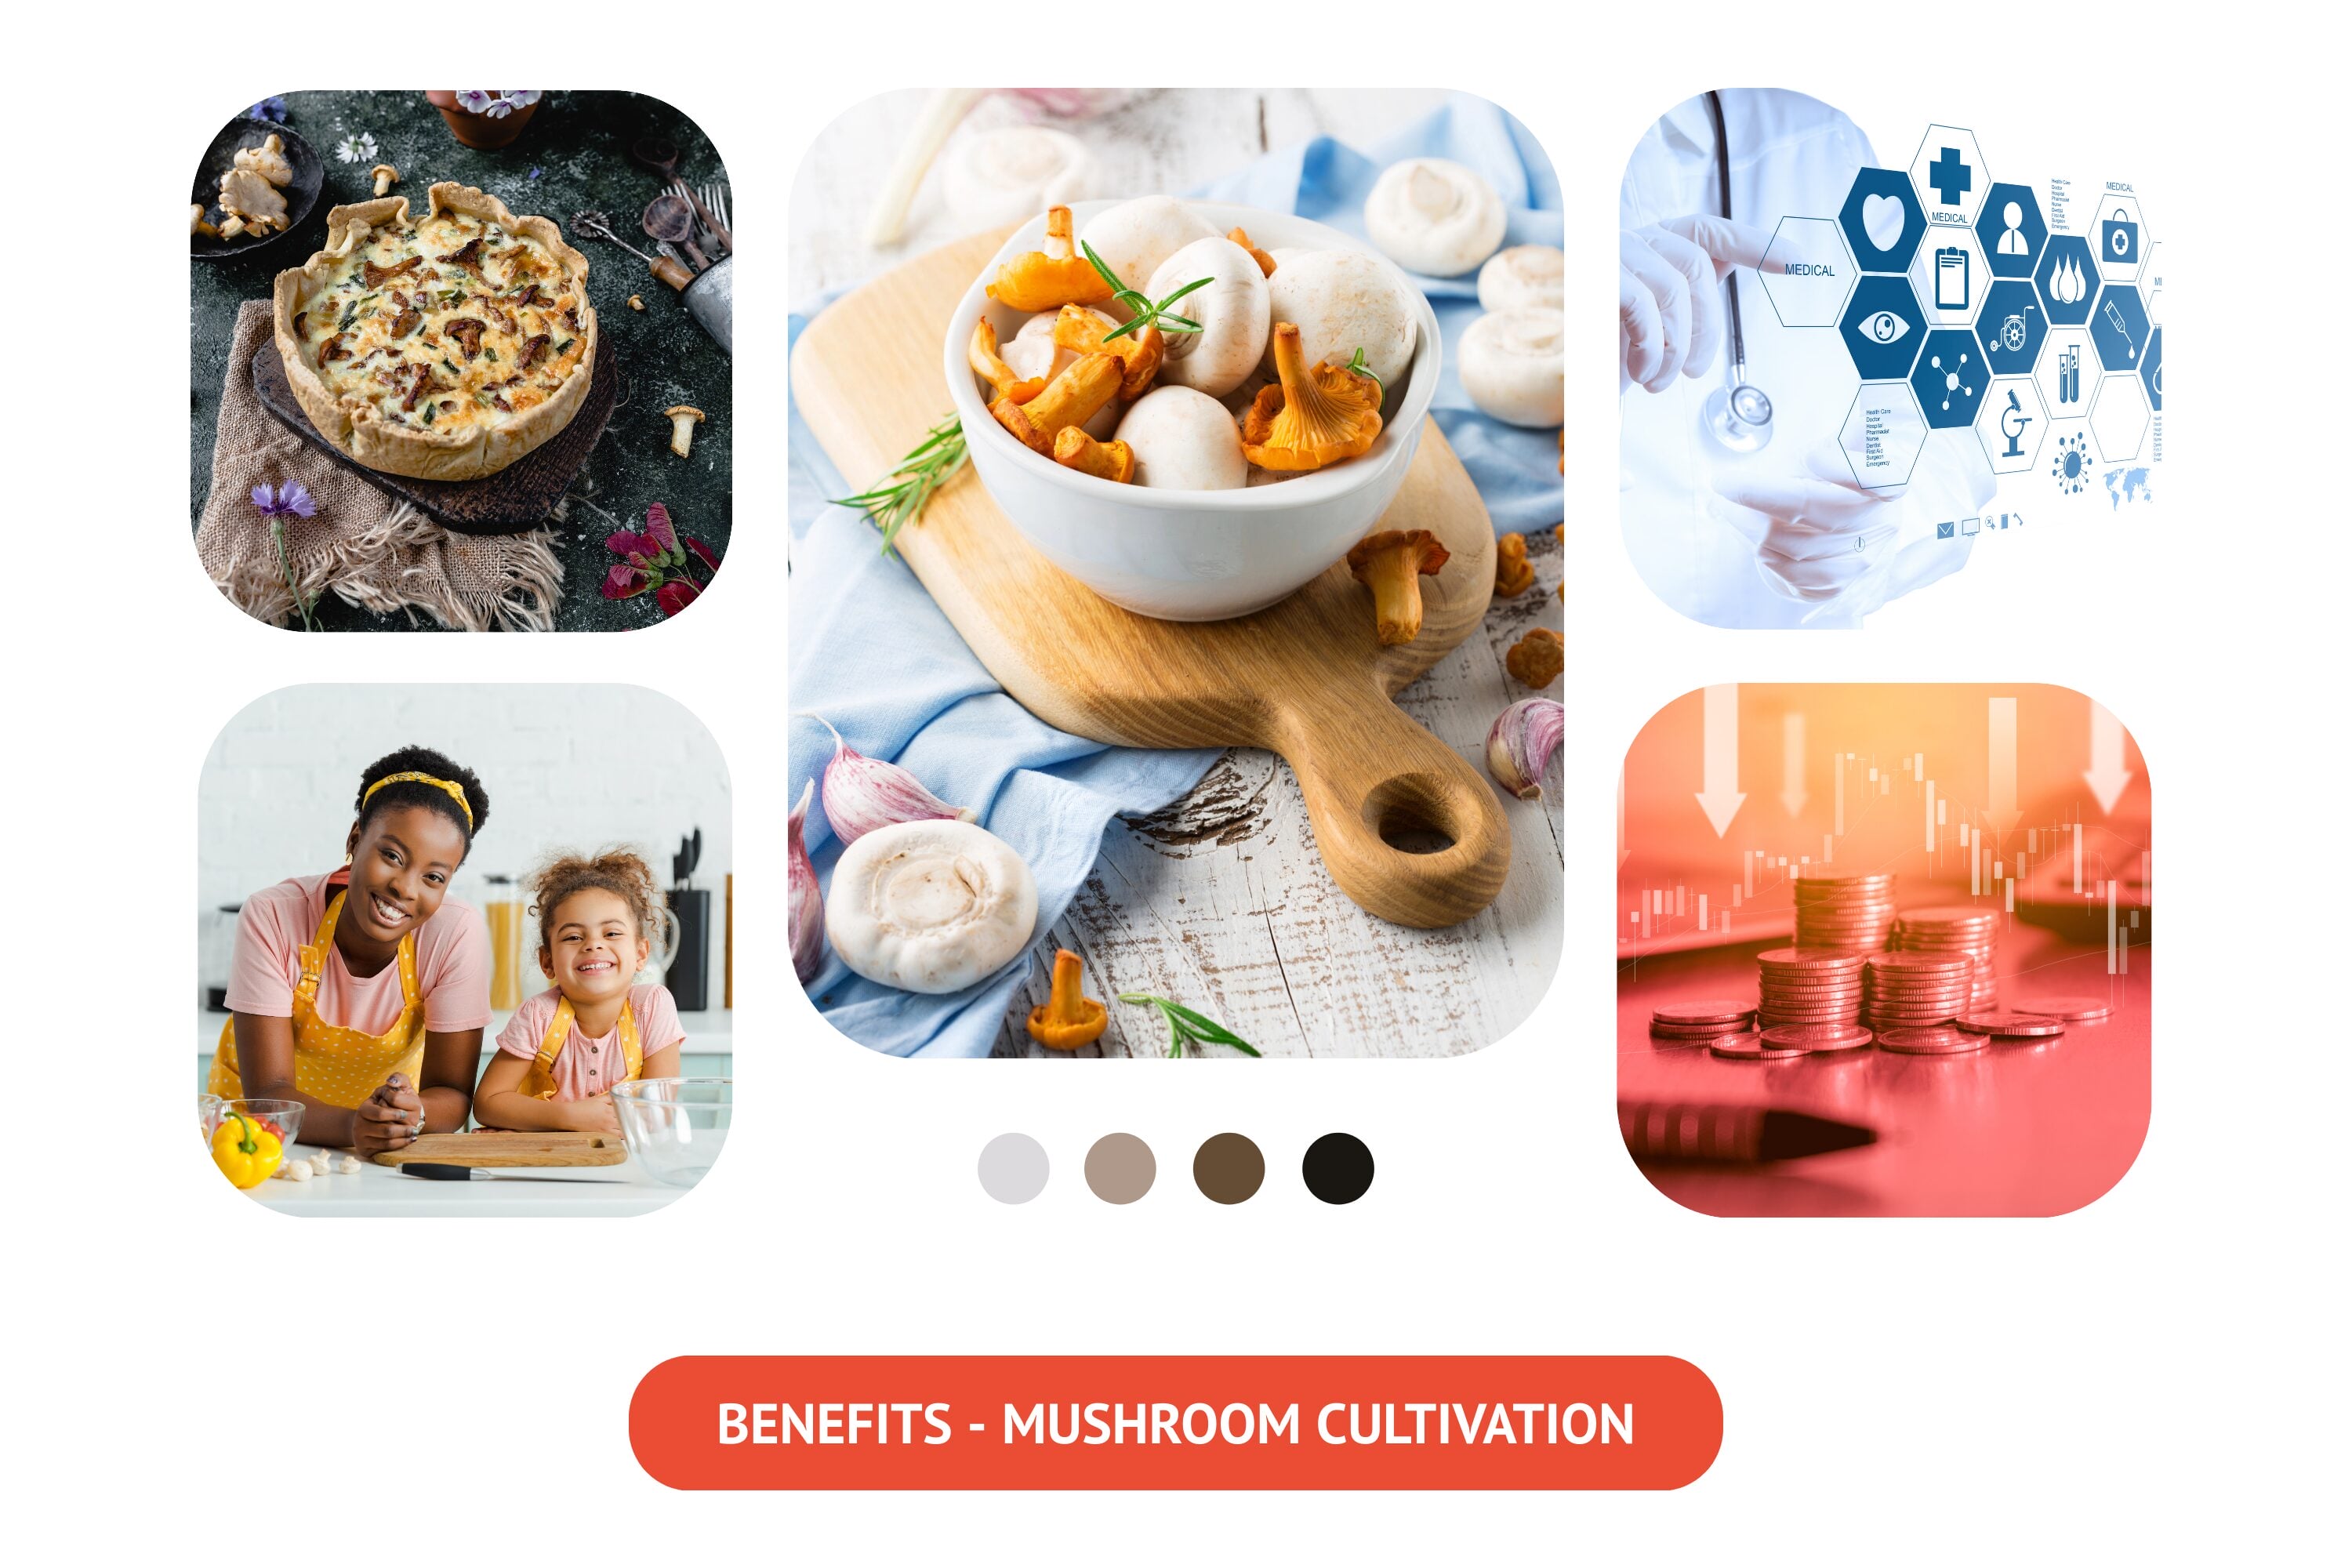 Benefits of cultivating mushrooms include their nutritional value, minimal space and resource requirements, profitability, and environmental advantages.